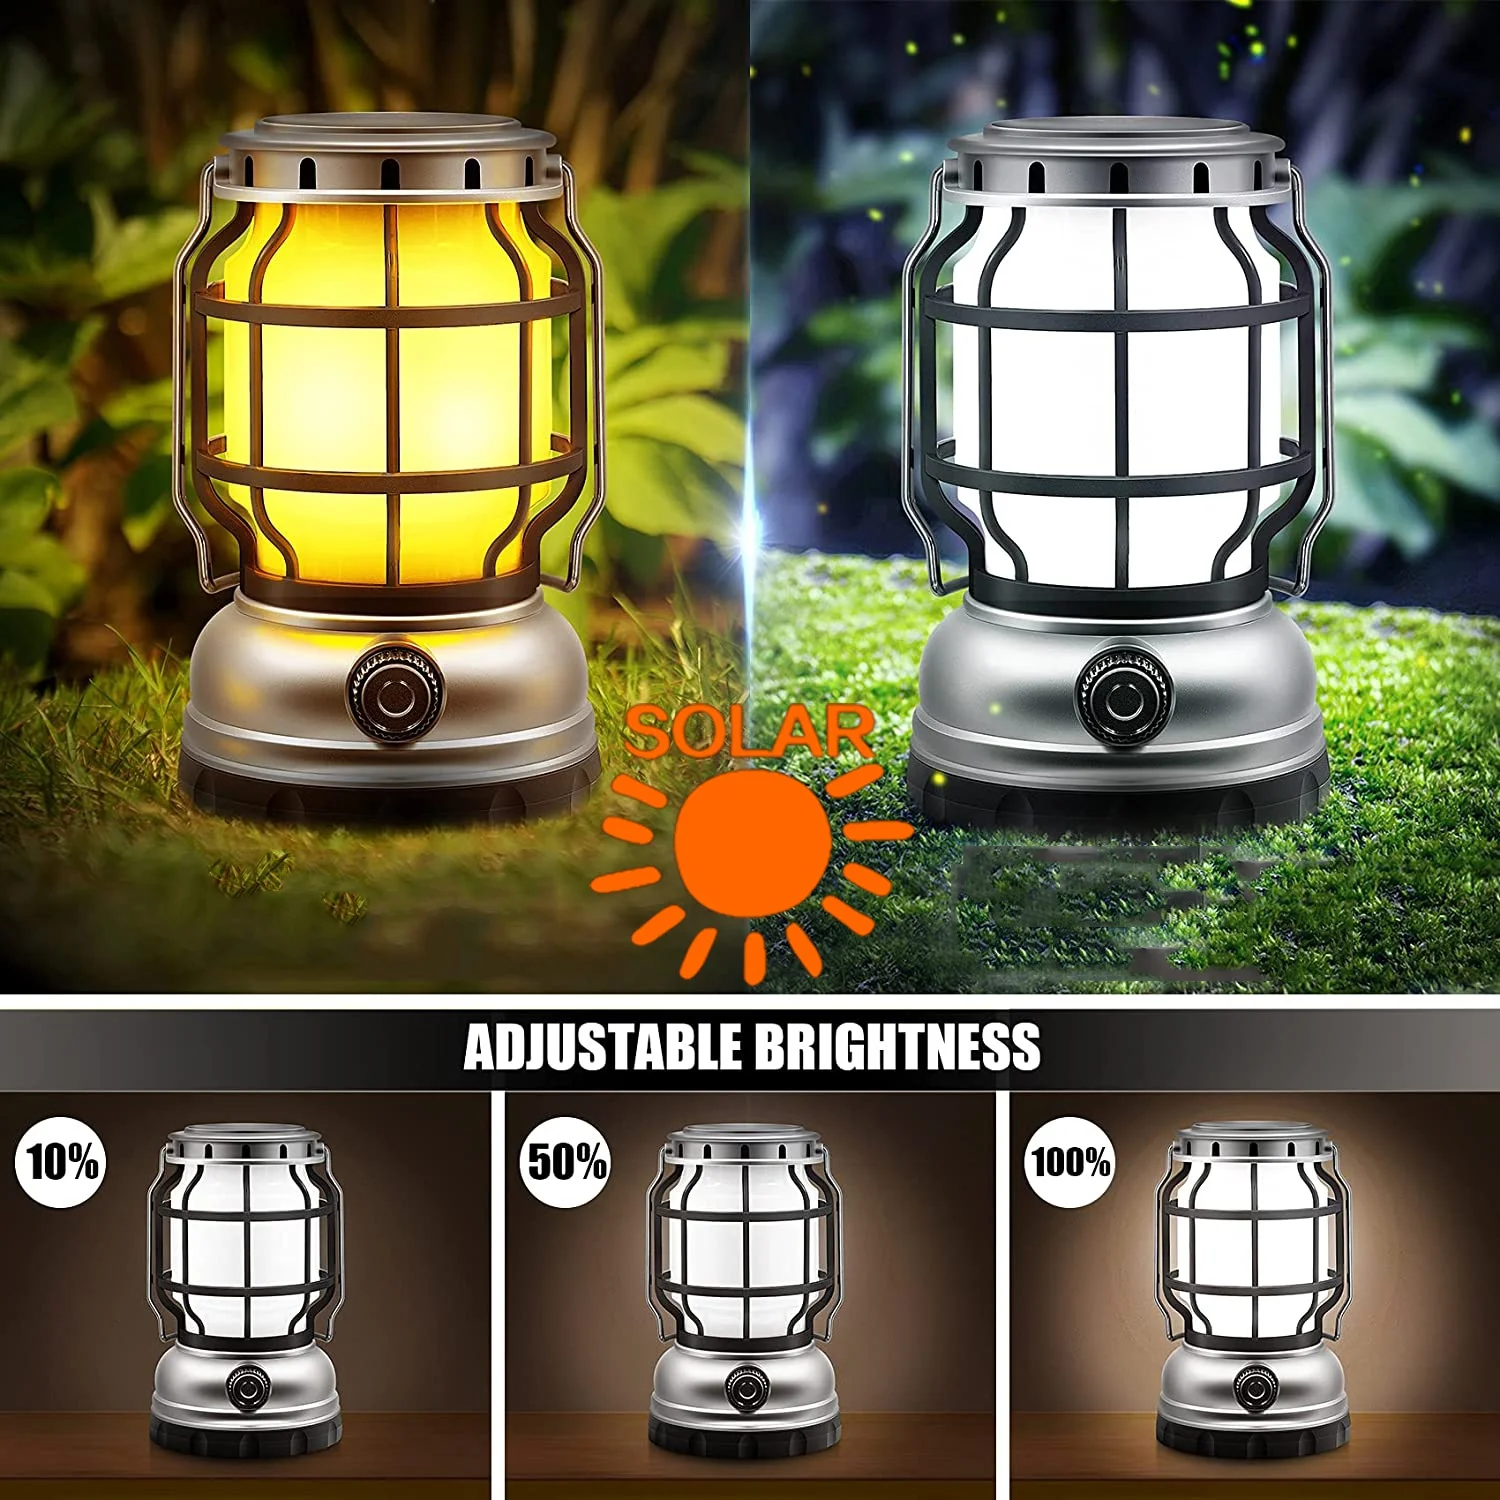 Solar Waterproof Camping Lantern Rechargeable Camping Light withPower Bank Flickering Flame LED Light Hook Emergency Tent Lamp